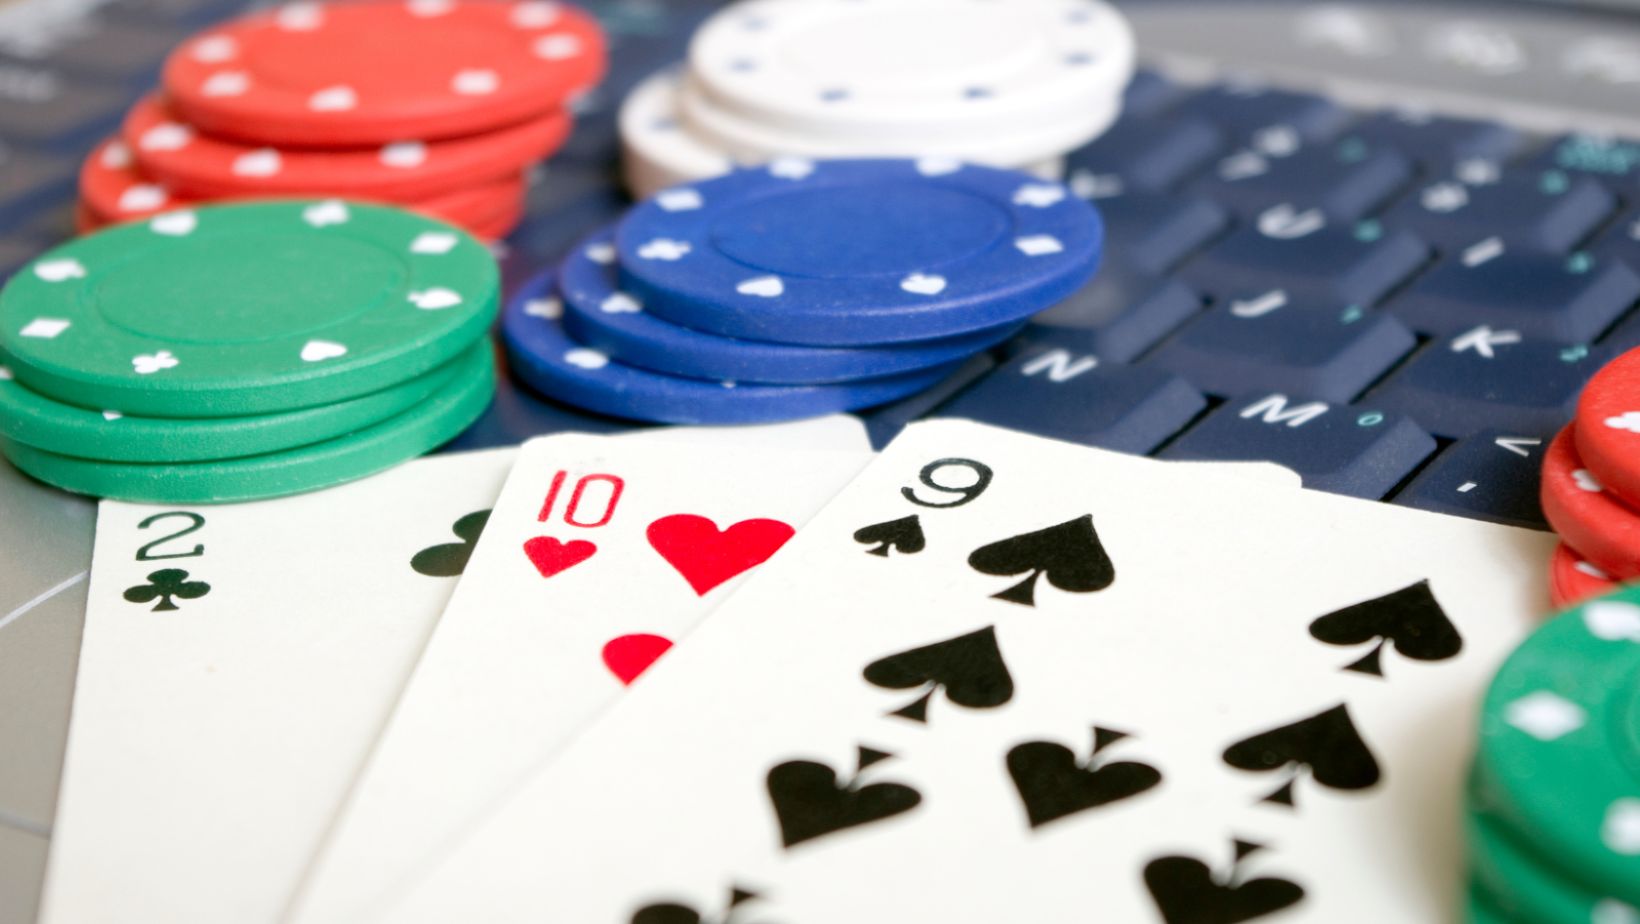 How People Are To Reaping Big From Online Gambling